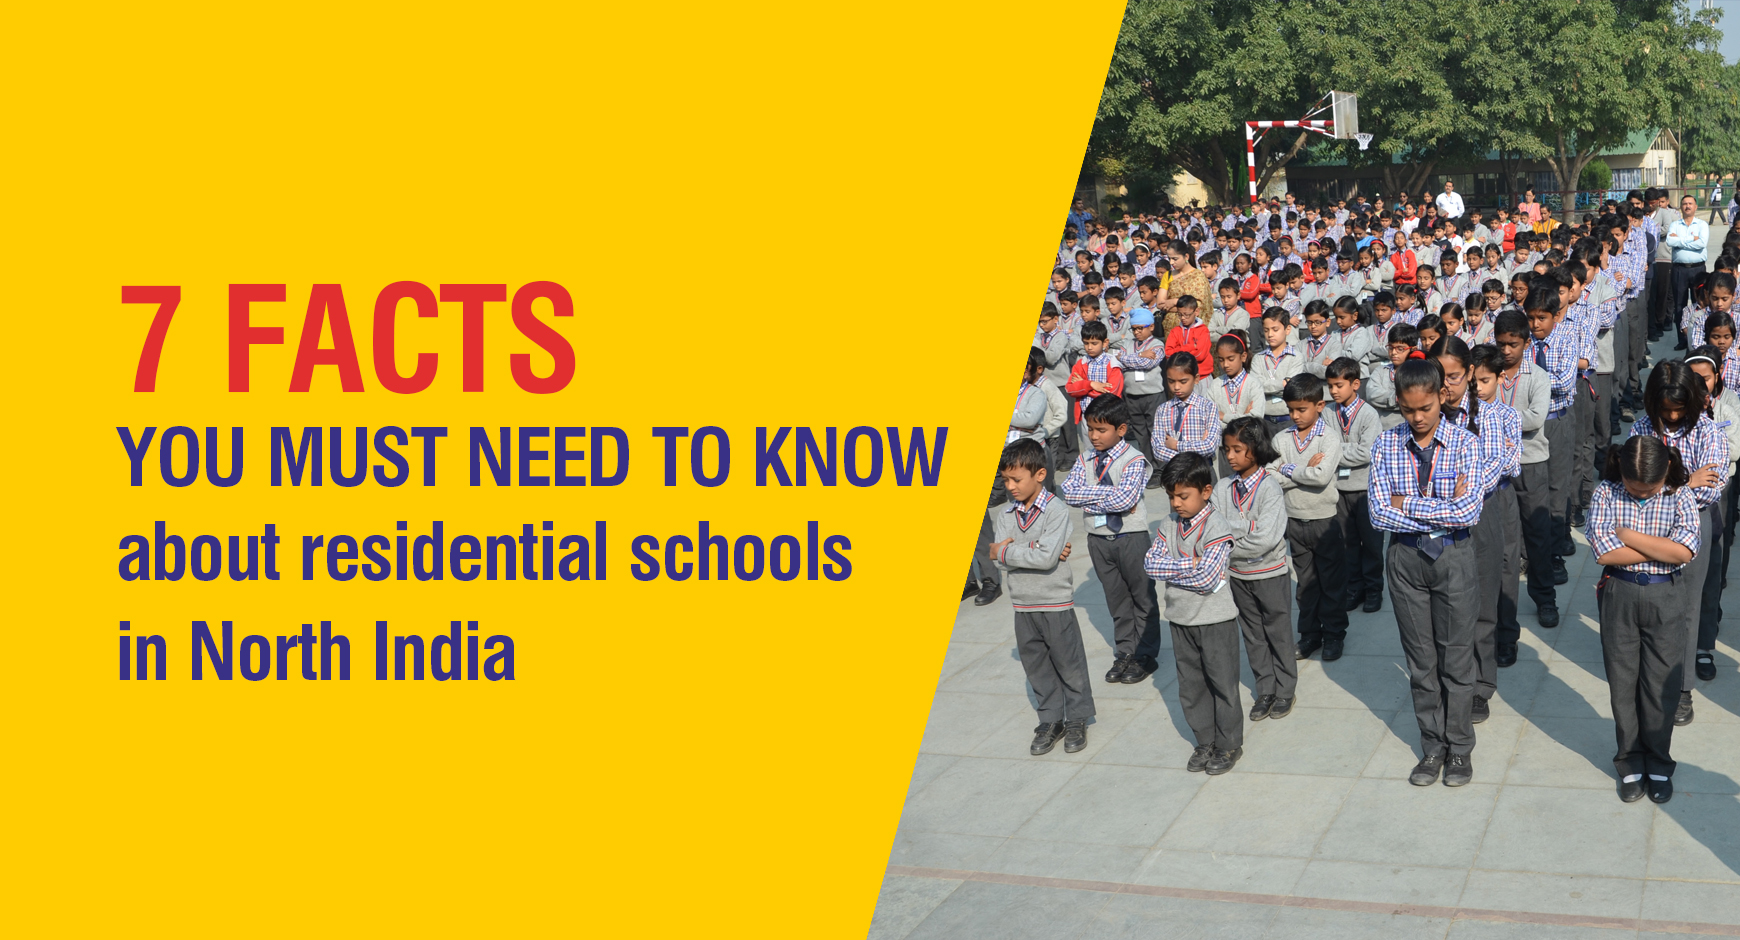 7 facts you must need to know about residential schools in North India